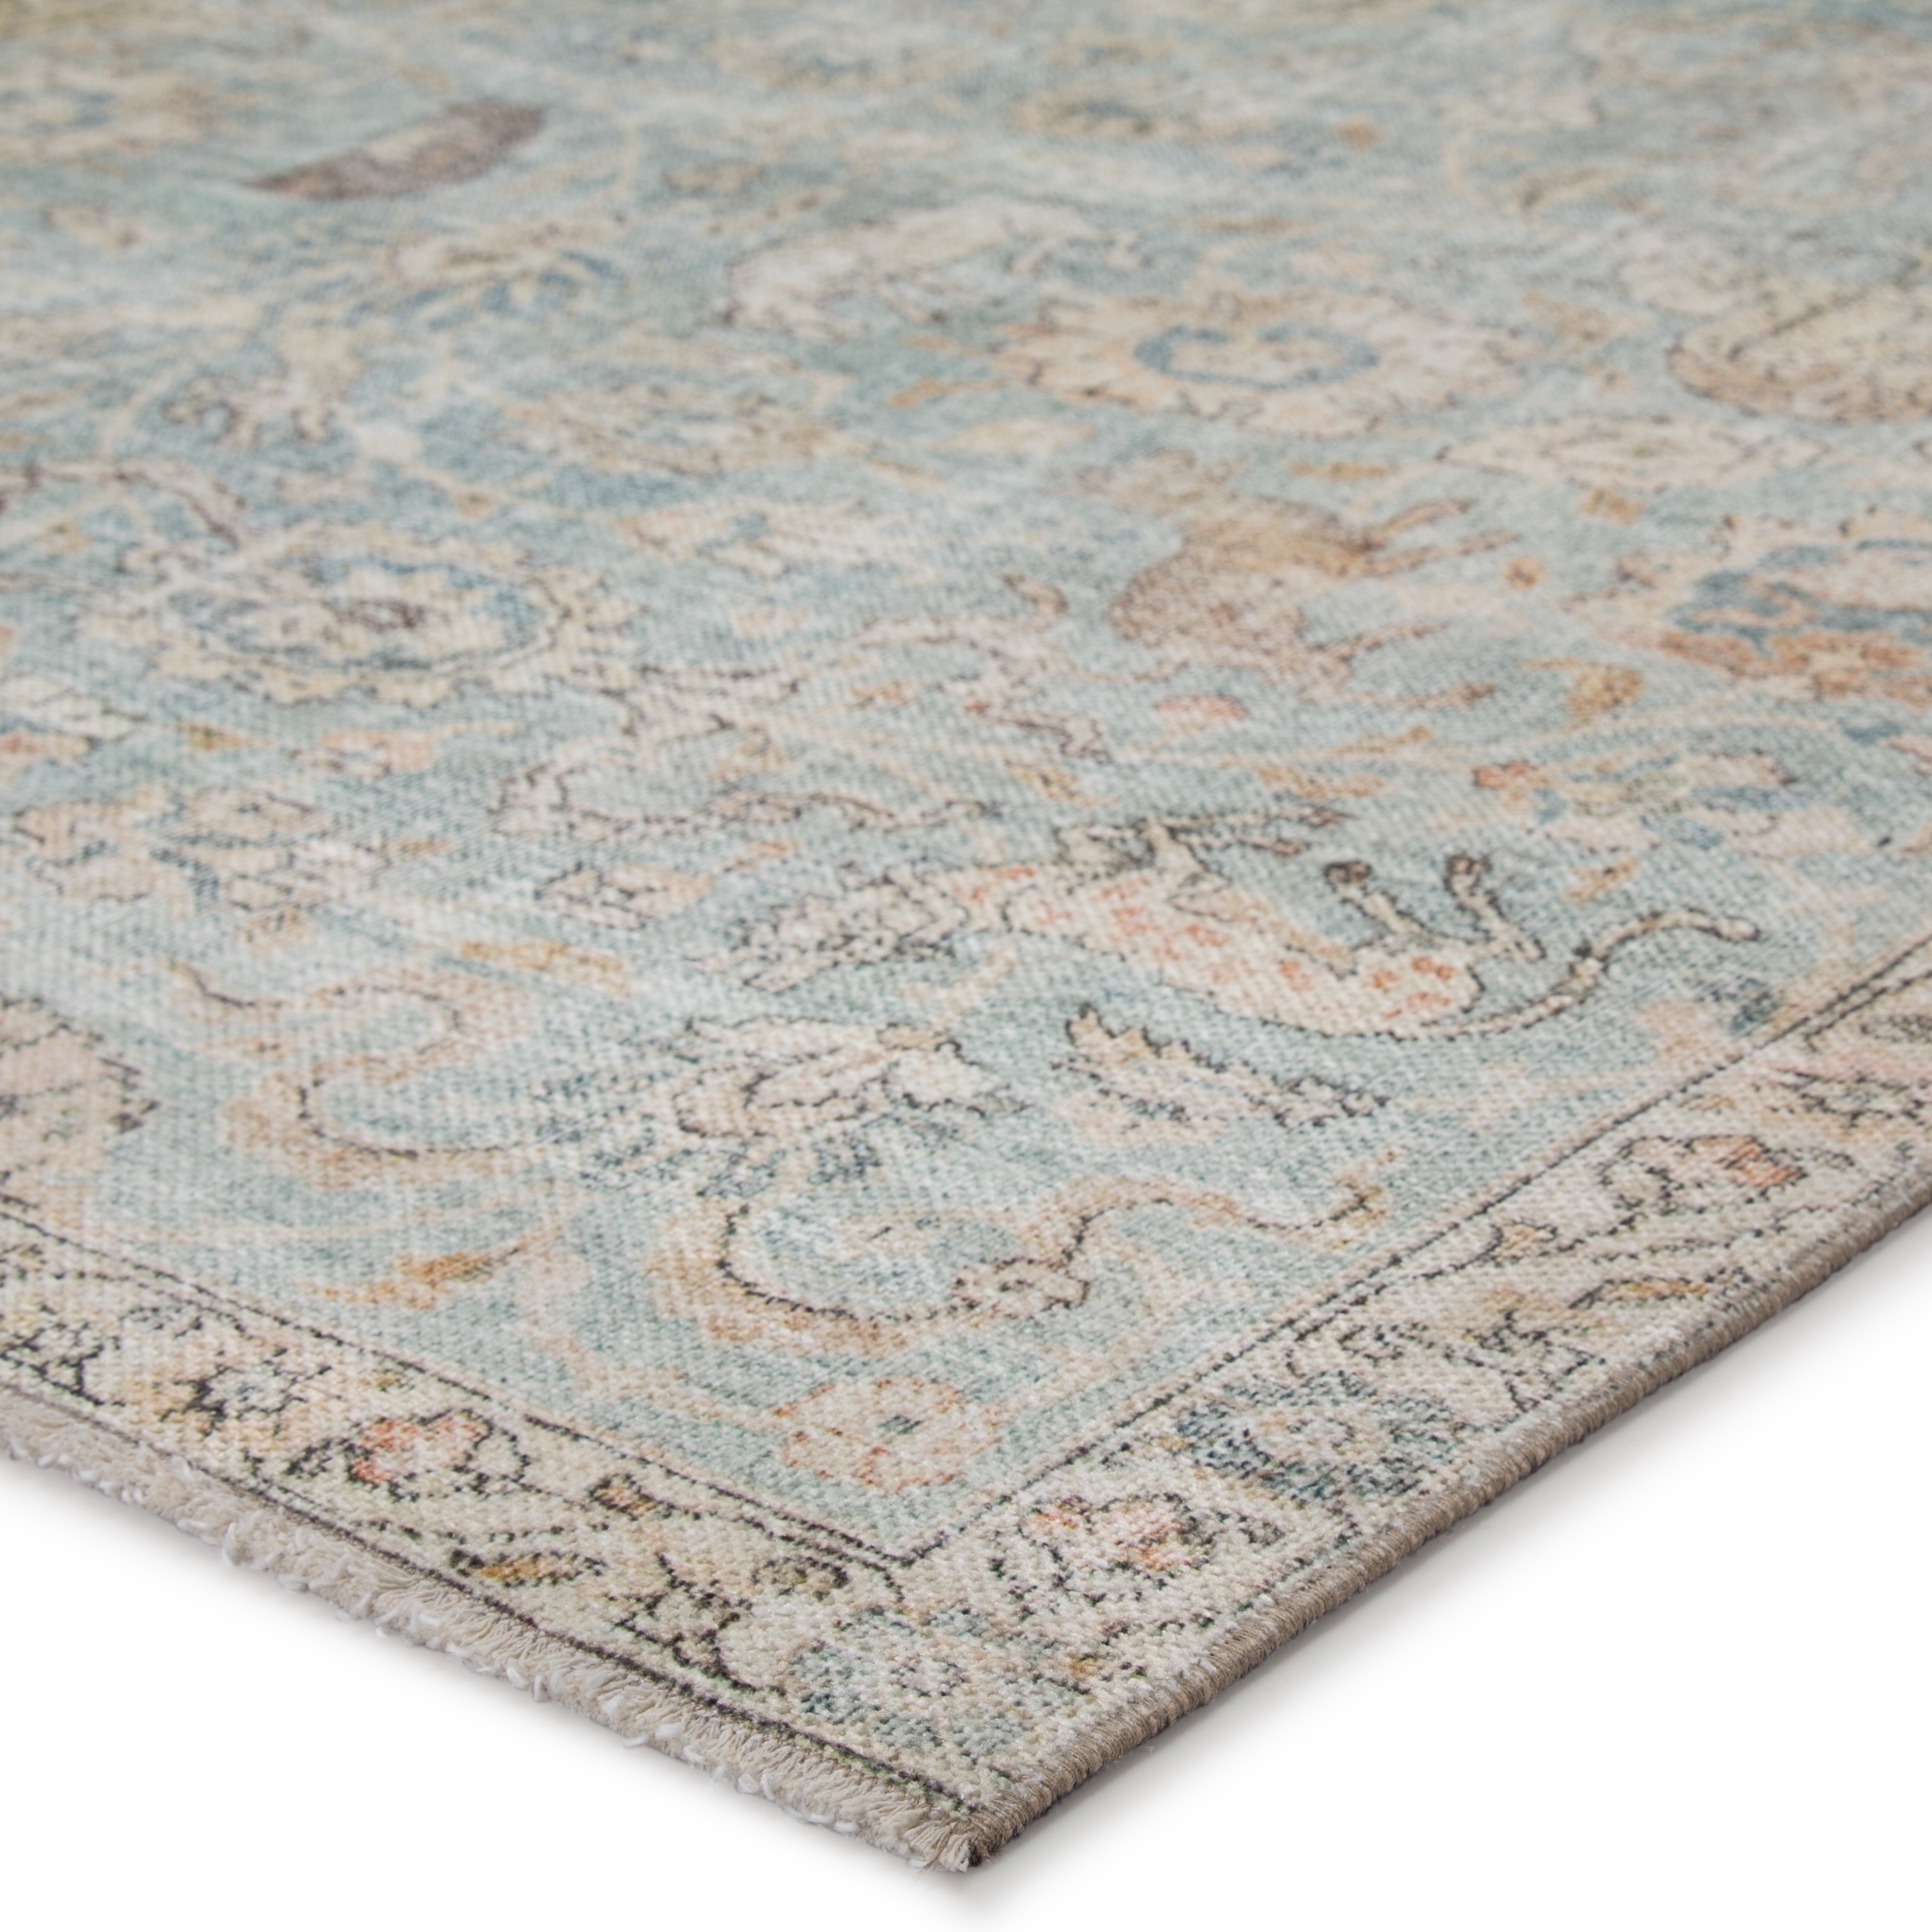 Stag Oriental Teal/ Gold Area Rug (7'10"X9'10") - Image 1